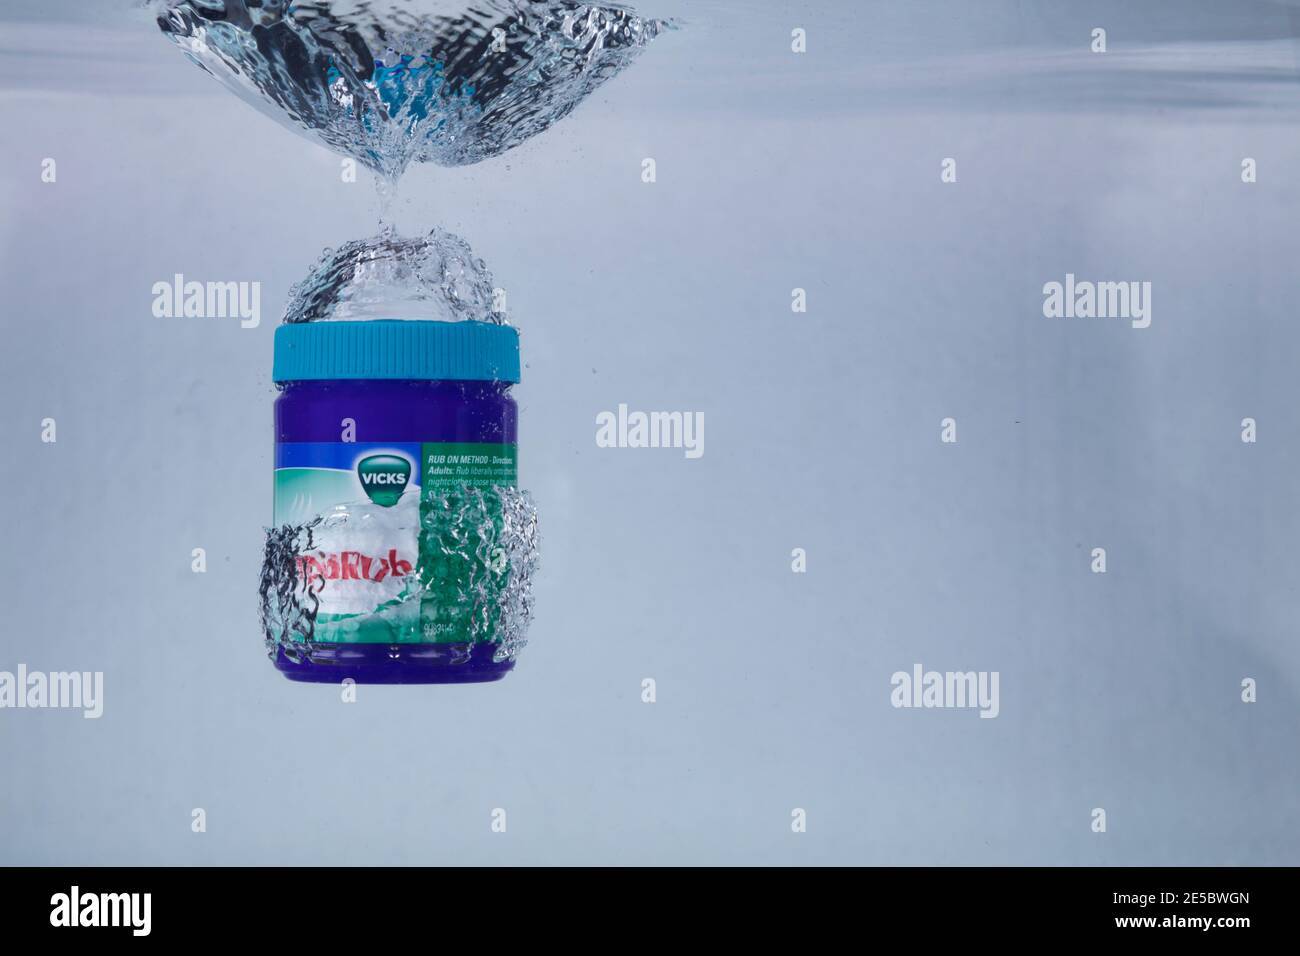 Hi-speed shot of a tin of Vicks Vaporub dropping into water. Ultra hi-speed of 1/5000th of a second. Stock Photo